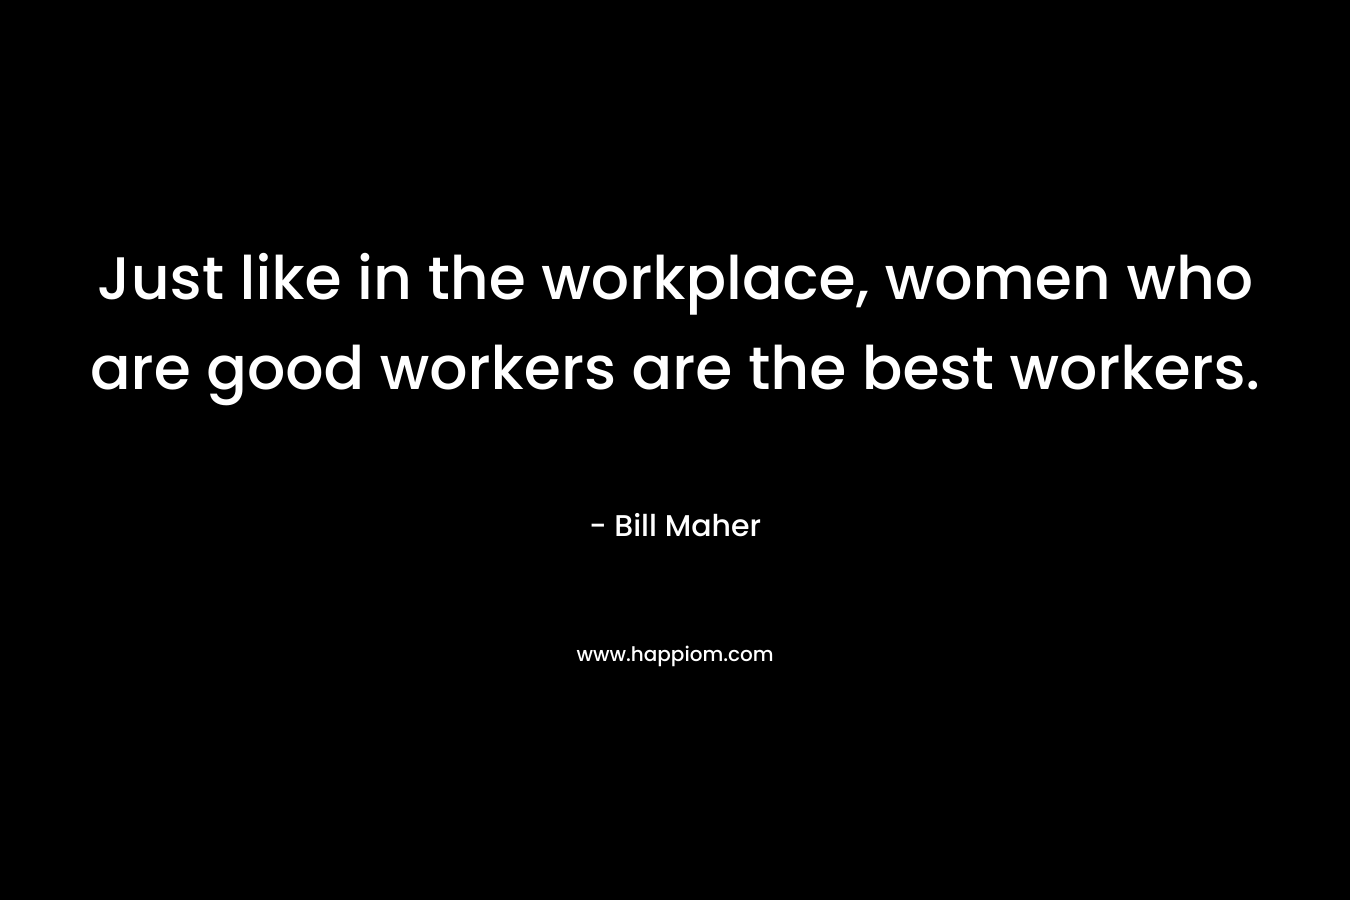 Just like in the workplace, women who are good workers are the best workers. – Bill Maher